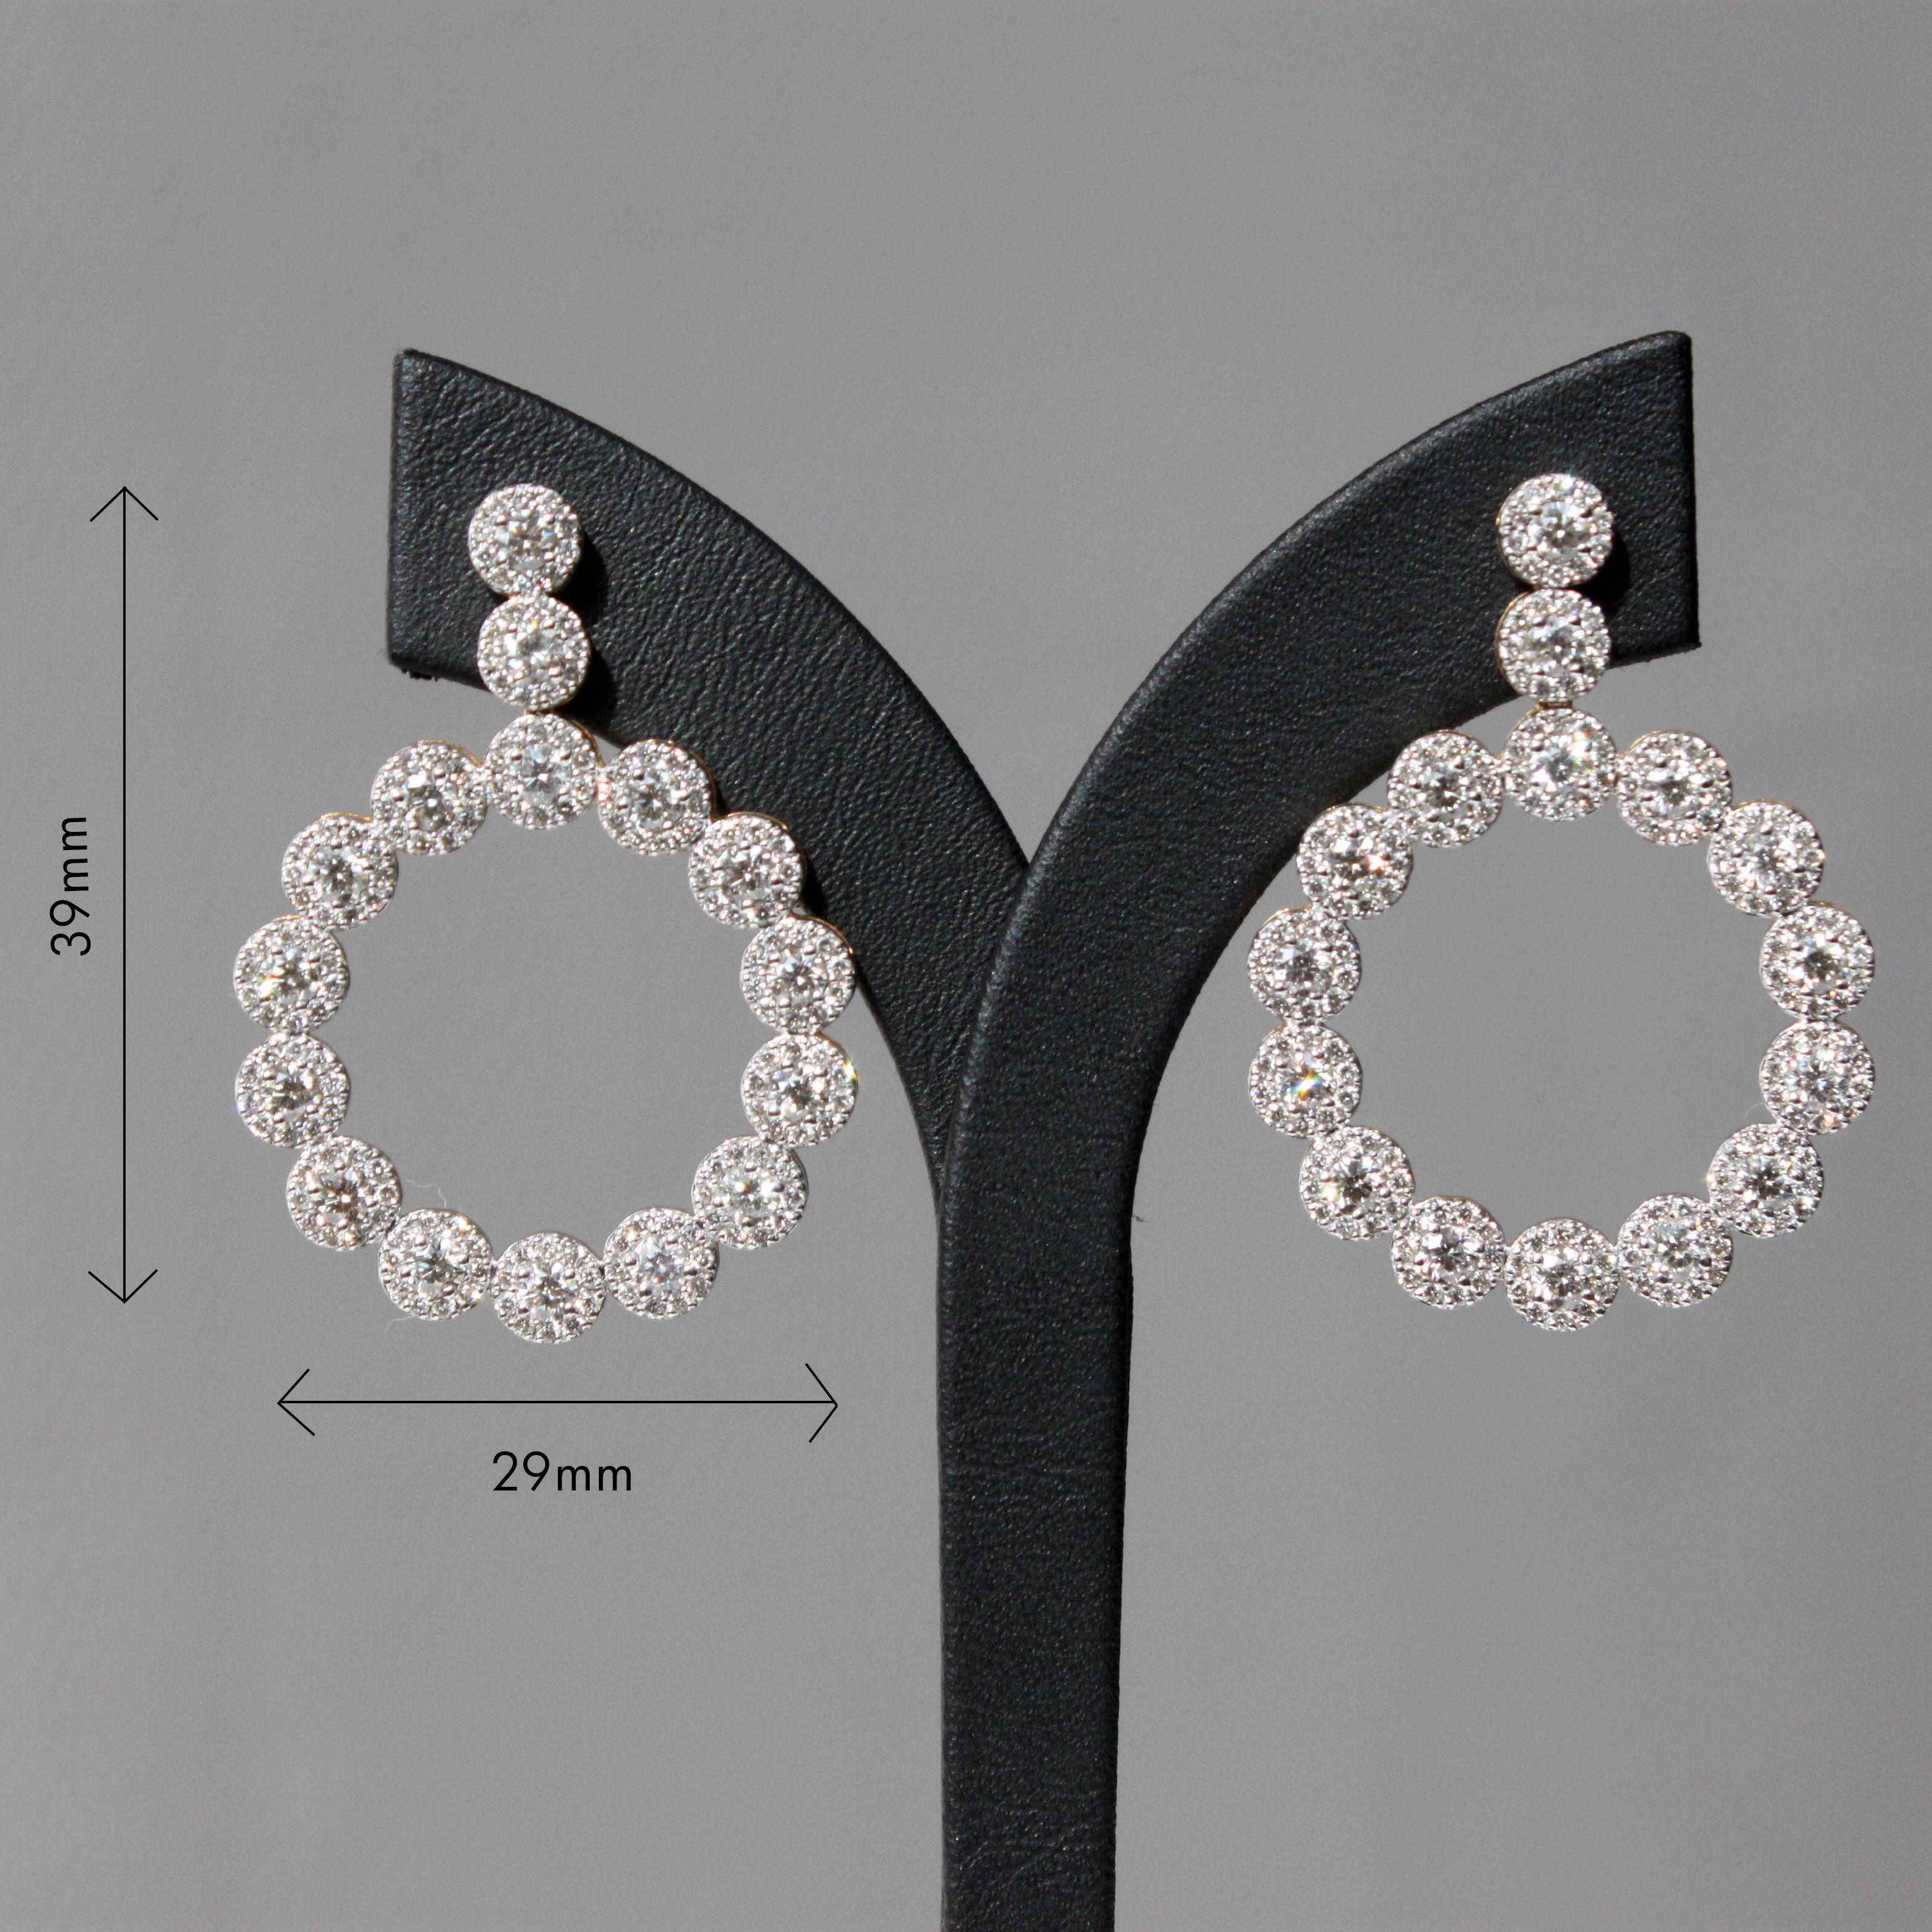 14K gold
5.27ct natural diamonds VS-SI quality and Top Top light brown (TLB/ TTLB) colour
Total earring weight 10.91 g

Embrace timeless sophistication with our exquisite diamond cluster earrings, a quintessential classic redefined with subtle